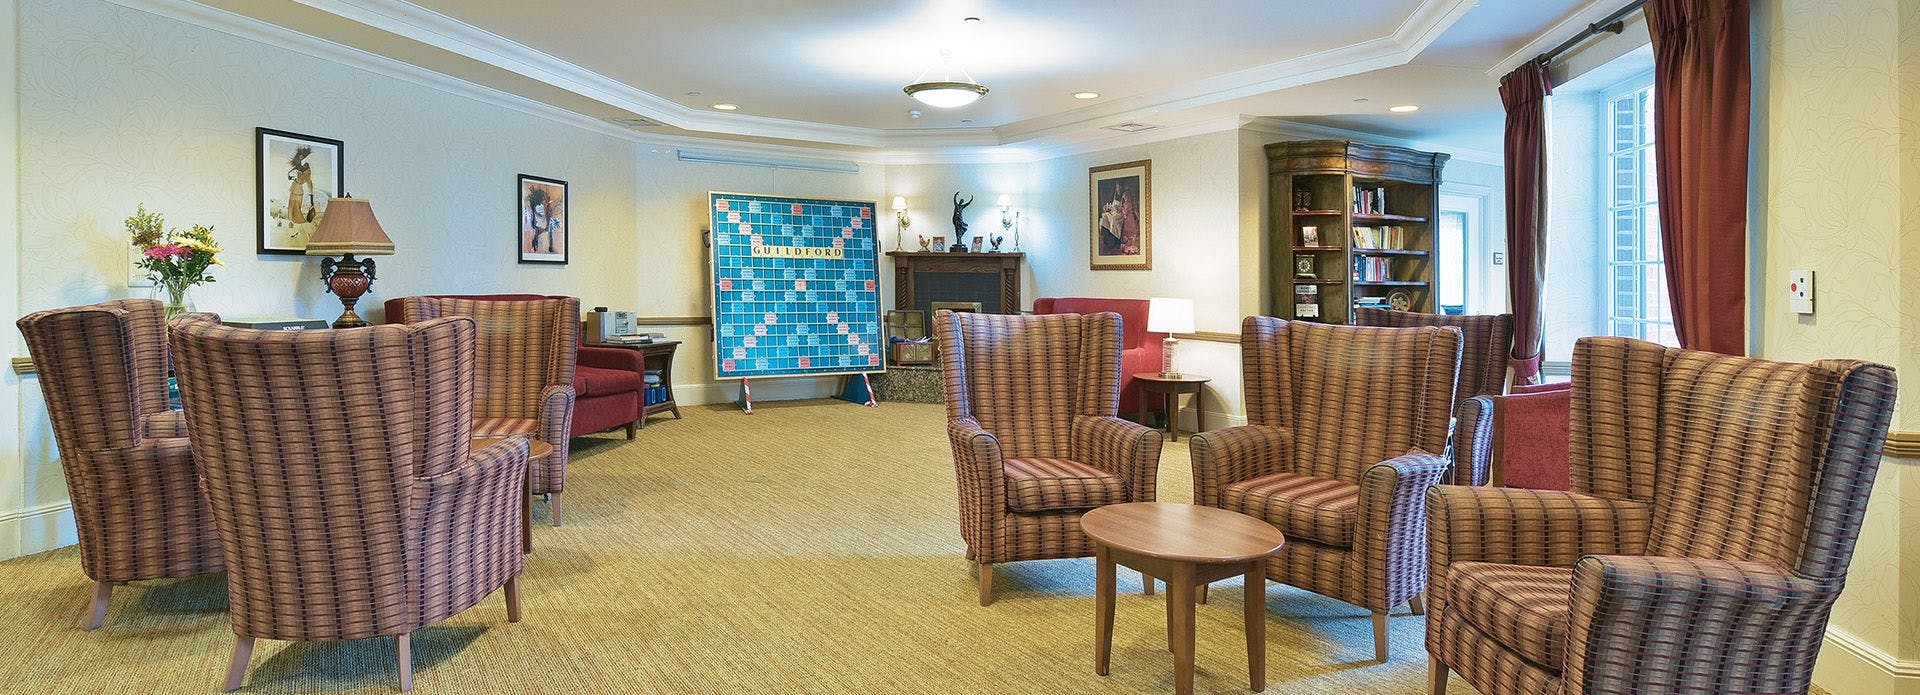 Communal Lounge at Guilford House Care Home in Guilford, Surrey